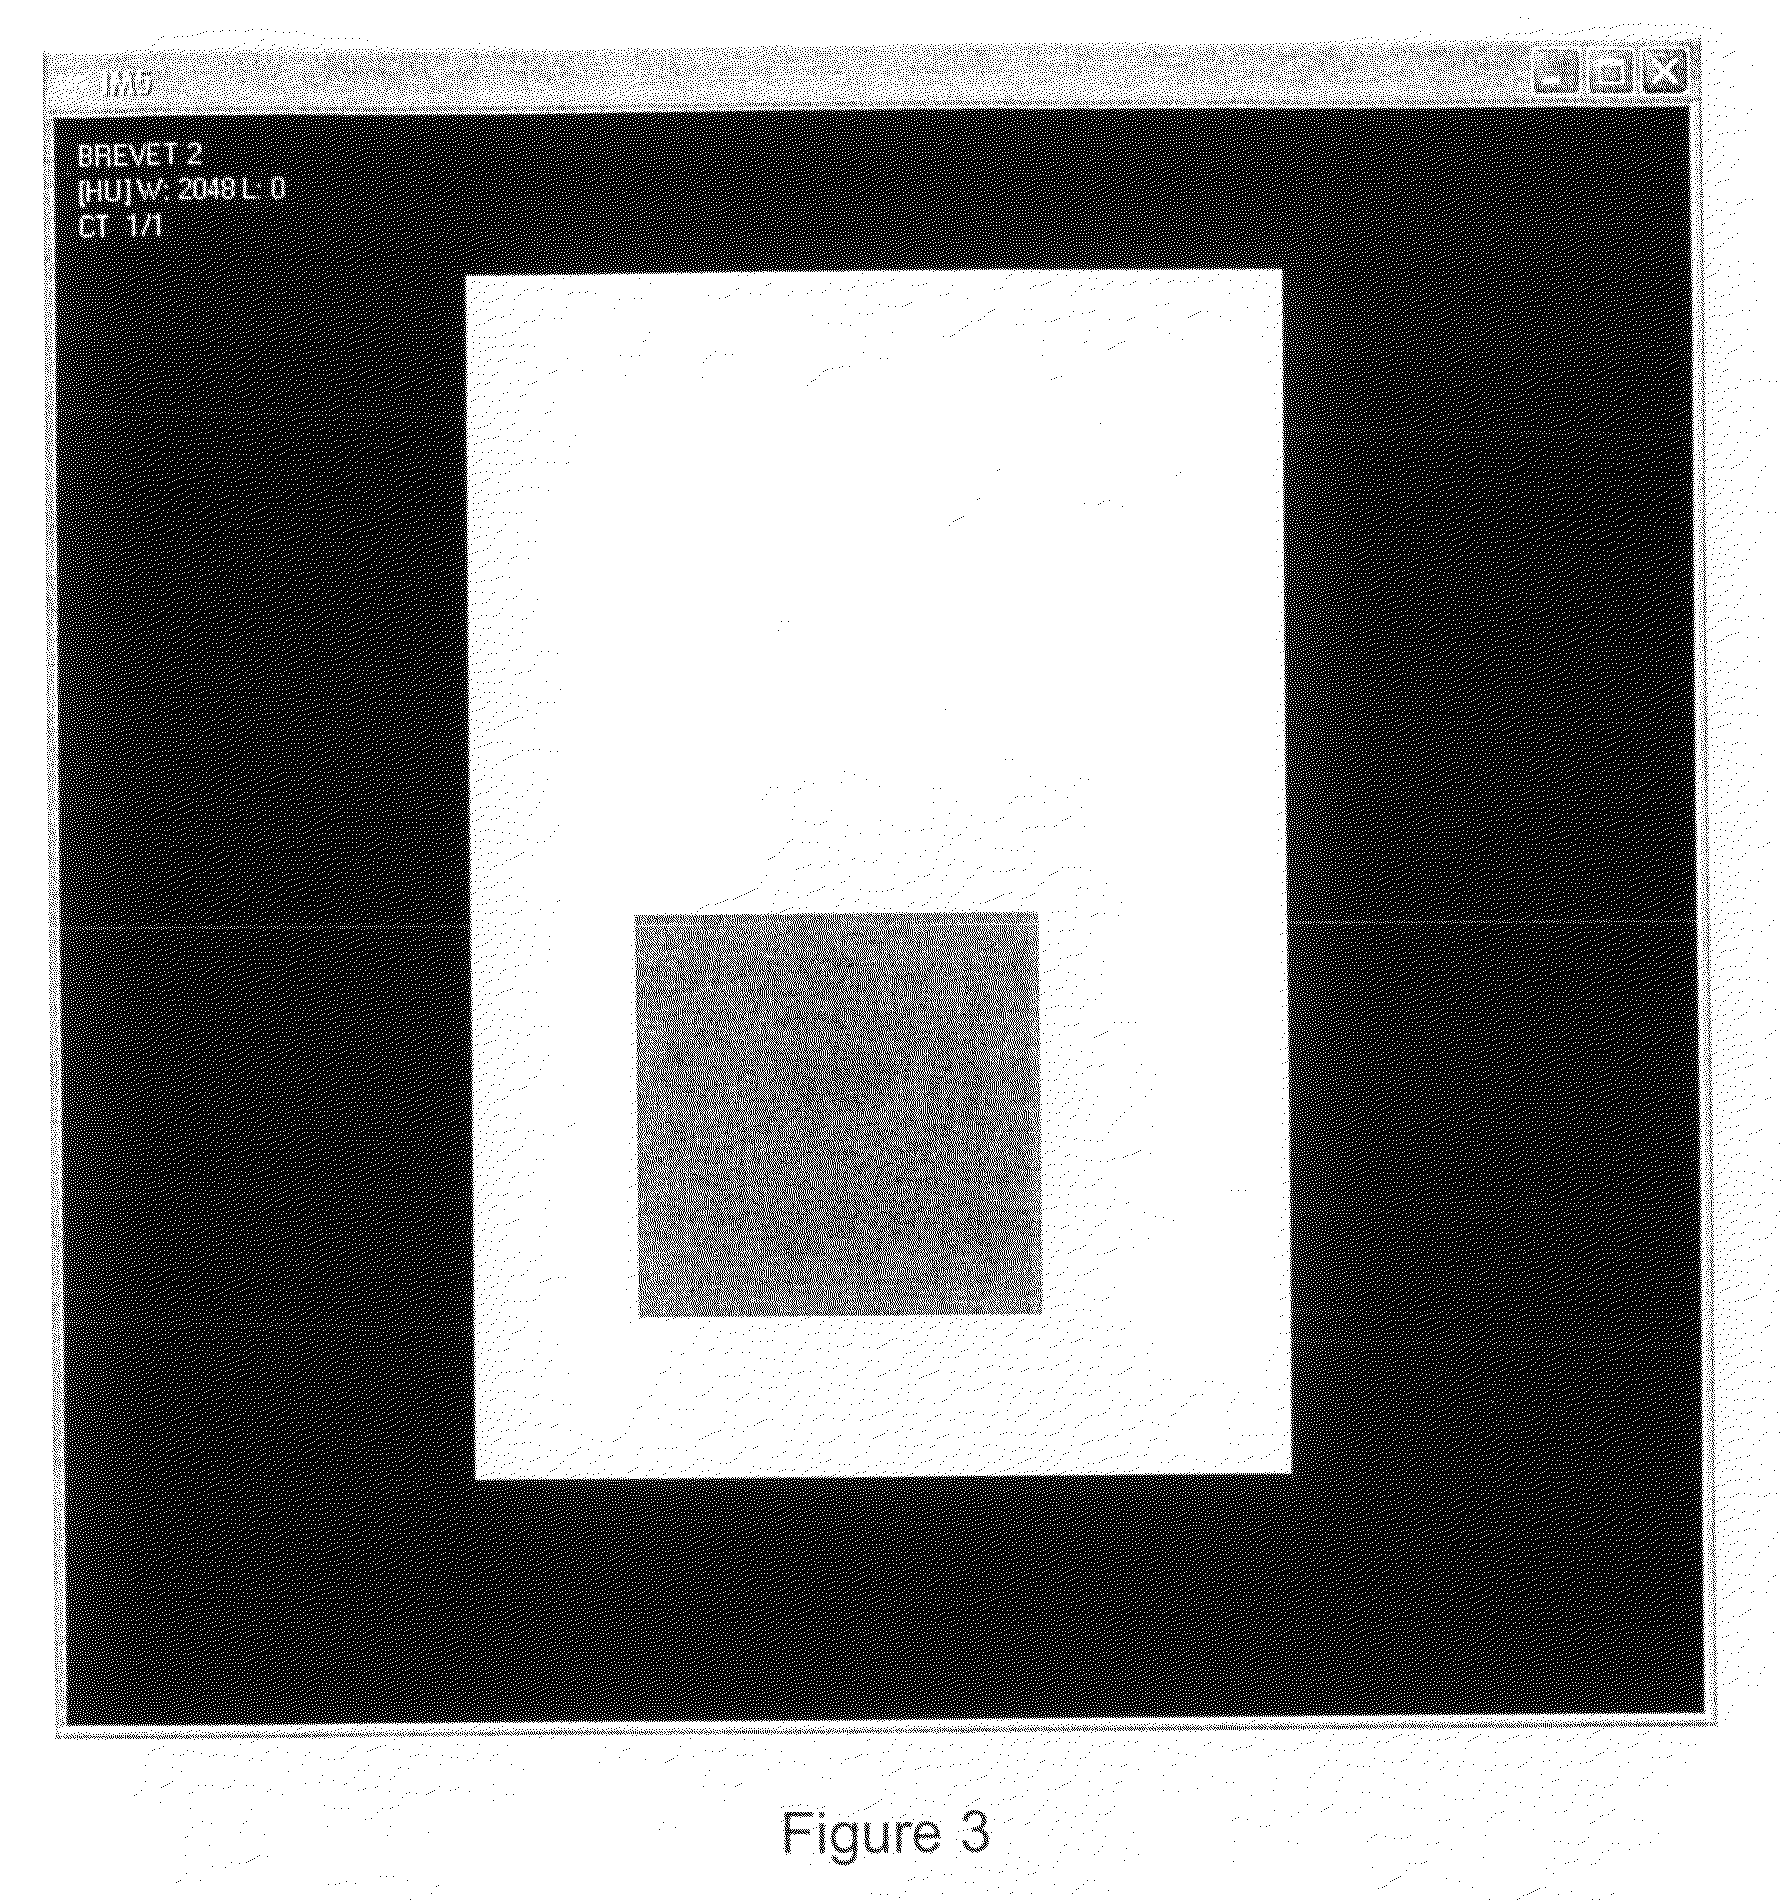 Method for generating digital test objects